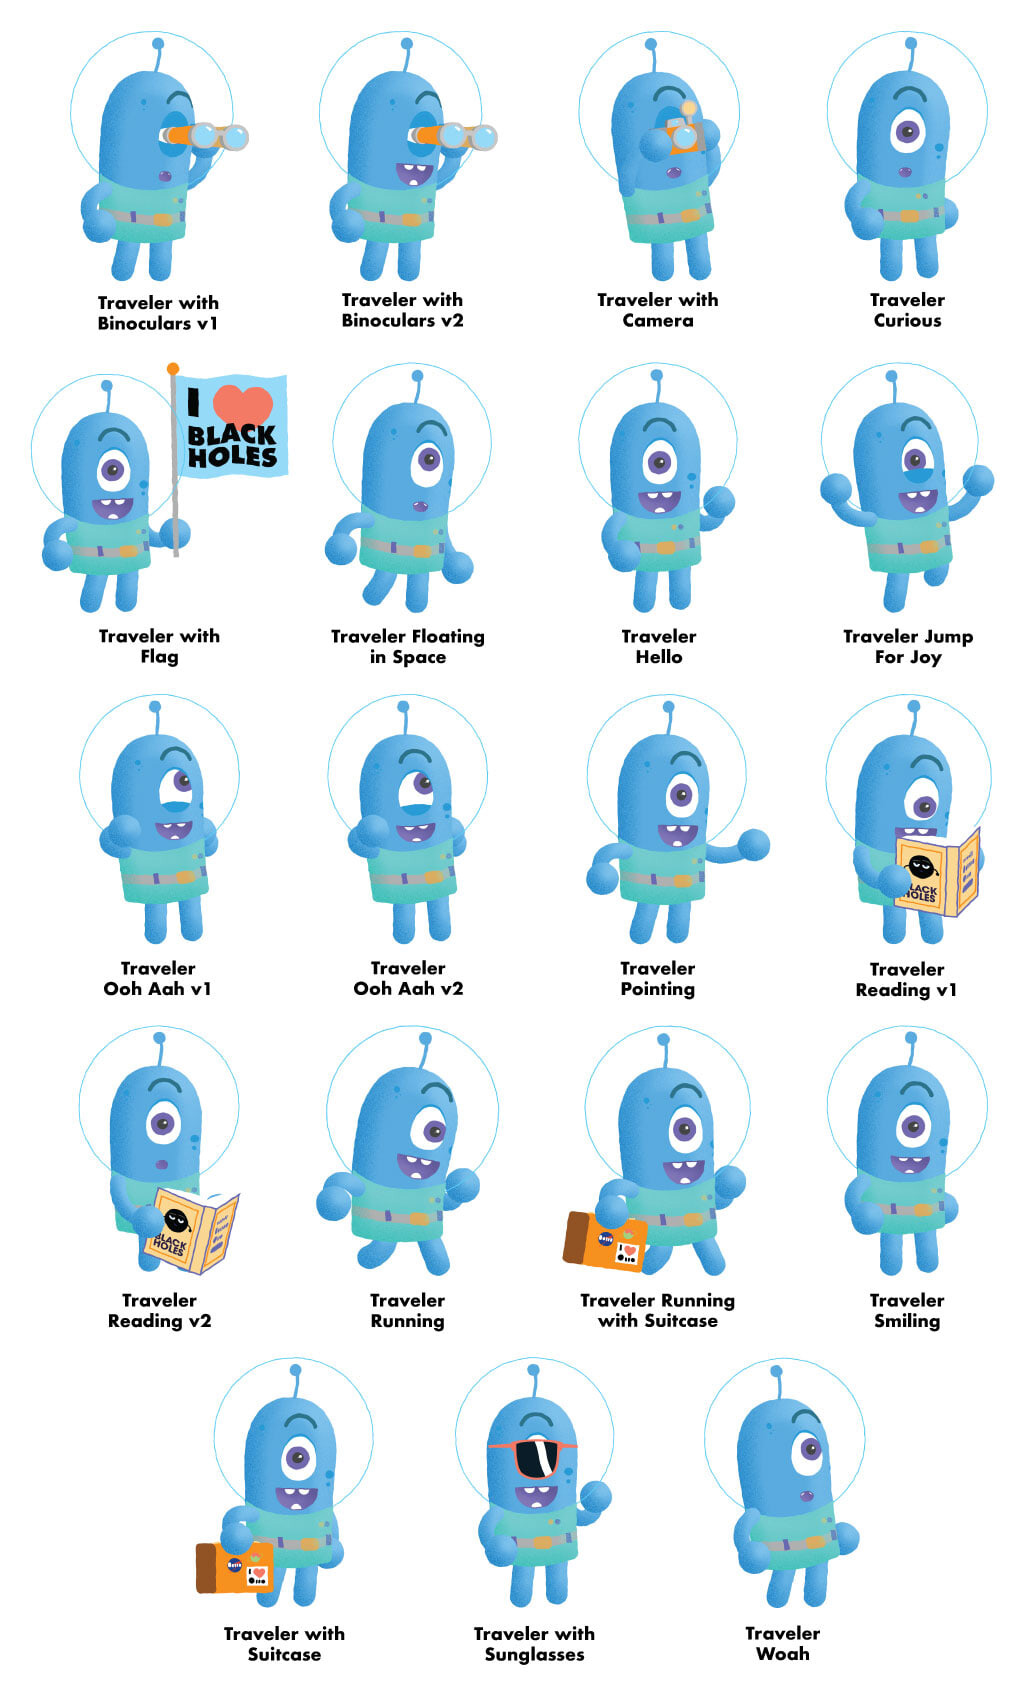 This image shows the same blue cartoon character in a variety of poses. The character, called The Traveler, has one eye and an antenna on the top of their head, and they are wearing a green spacesuit and a bubble-shaped clear helmet. In the top row, there are two poses with the Traveler using a pair of binoculars, one with them taking a photo, and another with them looking outward with their mouth in an “o.” In the second row, their poses include one where they hold a flag that says “I heart black holes,” another where they are looking up and to the right, floating, another where they are waving, and another with both their arms and one leg up as if jumping for joy. The third row has two poses where the Traveler has their hands near their face marveling over something, another where they are pointing to the right, and one where they are reading a book about black holes. The fourth row has another pose with them reading a book, but this time looking out with amazement, another pair of poses where they are running to the right, one of those holding a suitcase plastered with illegible stickers, and one with them standing and smiling. Finally, the fifth row has three poses, one with them holding a suitcase staring outward, another with sunglasses over their one eye, and the final pose looking up to the right with their mouth in an “o.” There is text below each image with a couple of words or a phrase describing each pose.